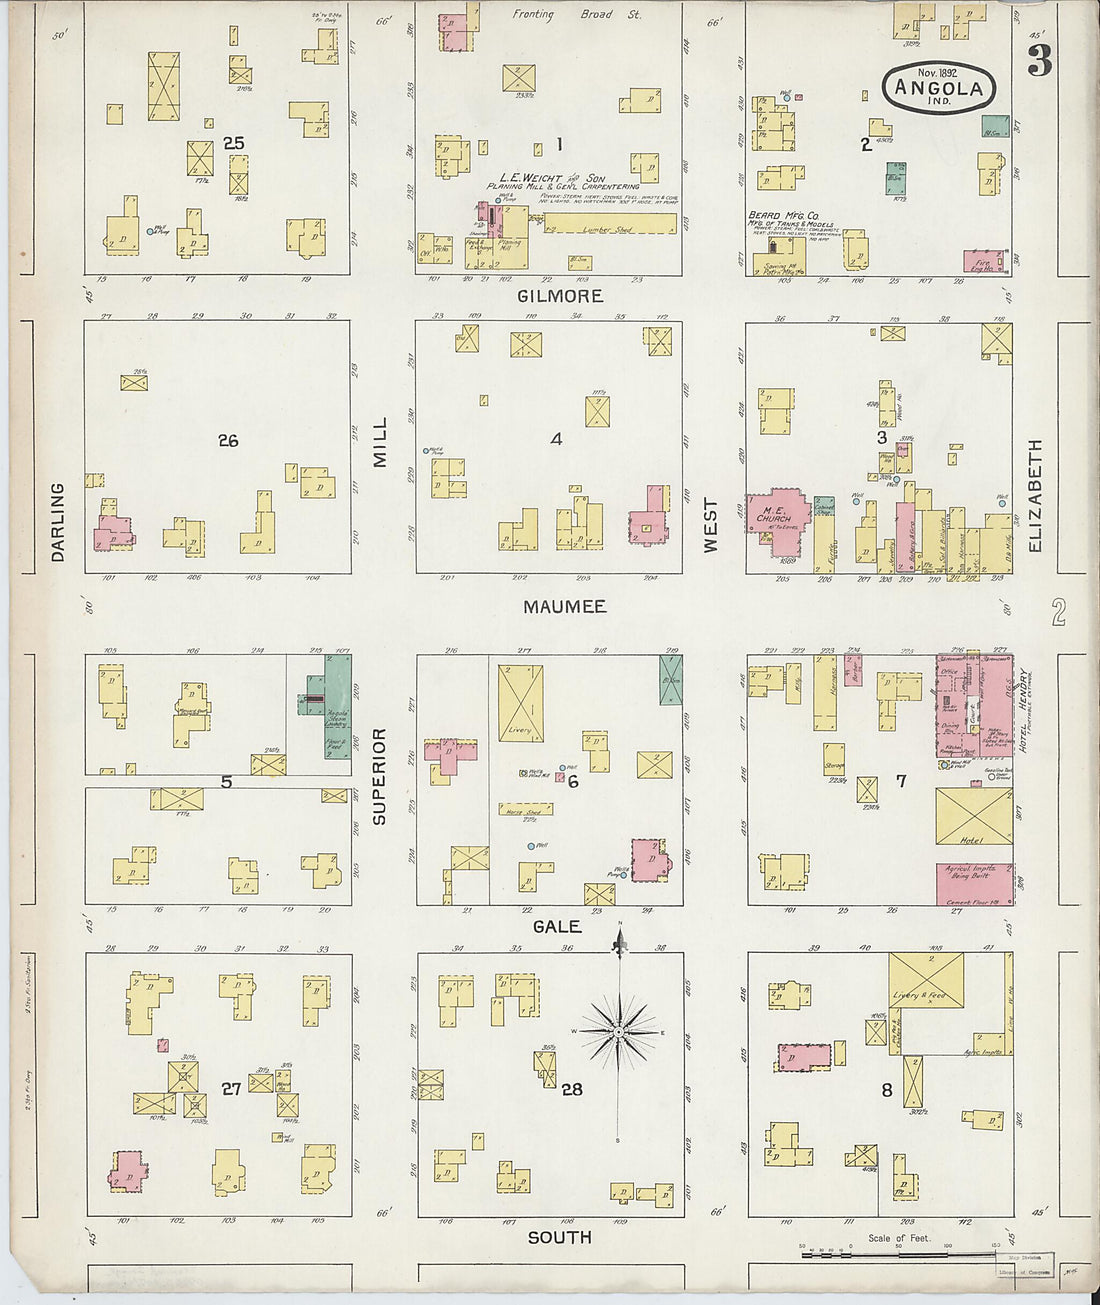 This old map of Angola, Steuben County, Indiana was created by Sanborn Map Company in 1892